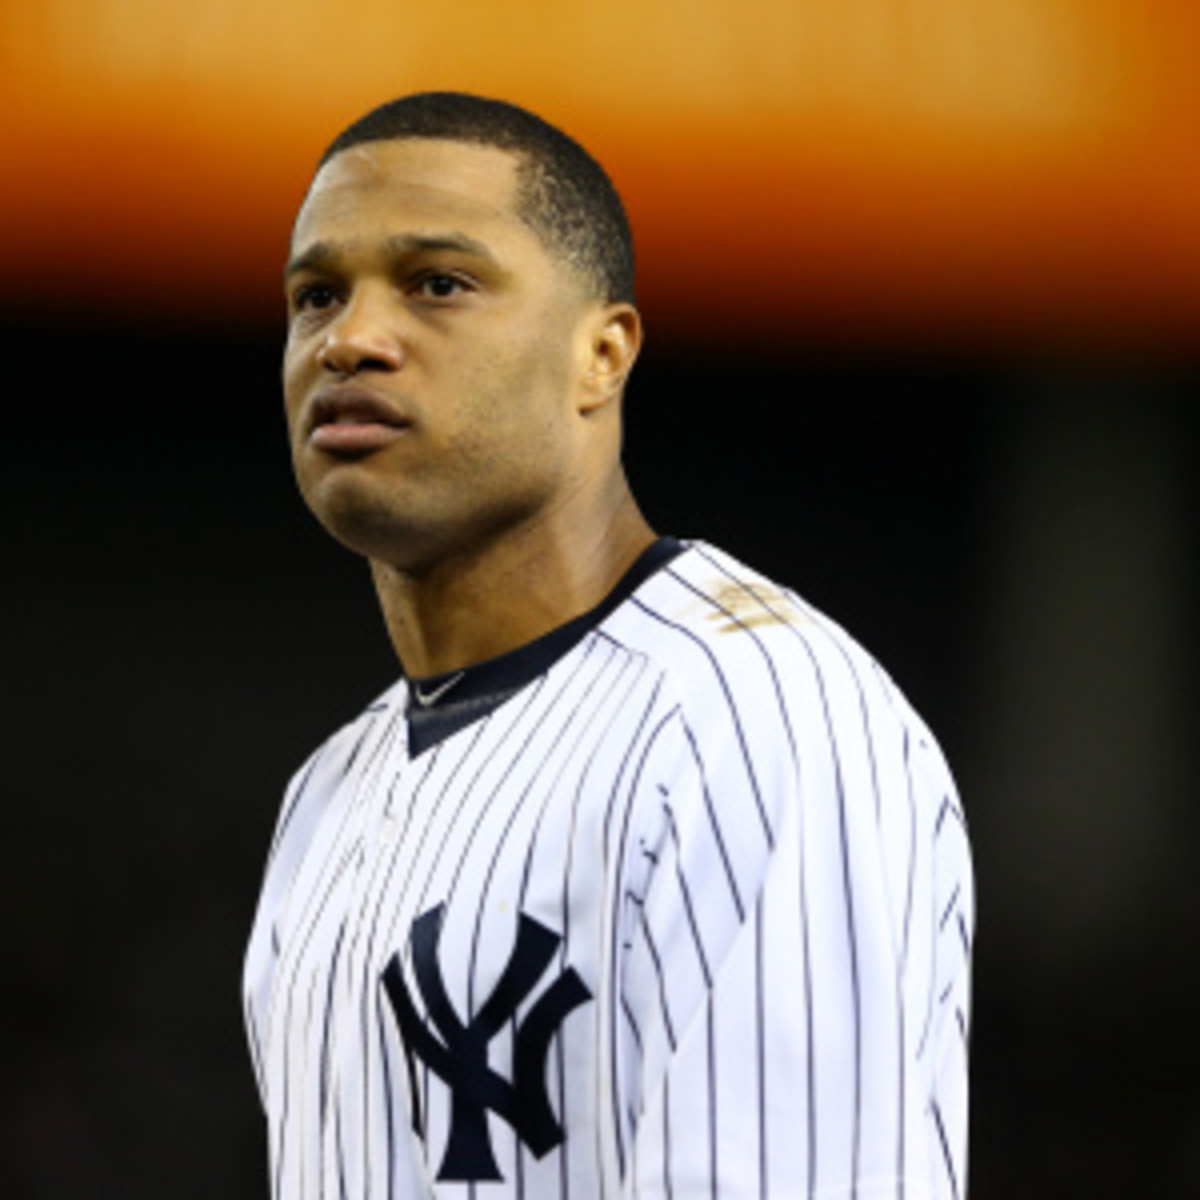 The Yankees and Robinson Cano are discussing a "significant long-term contract." (Al Bello/Getty Images)